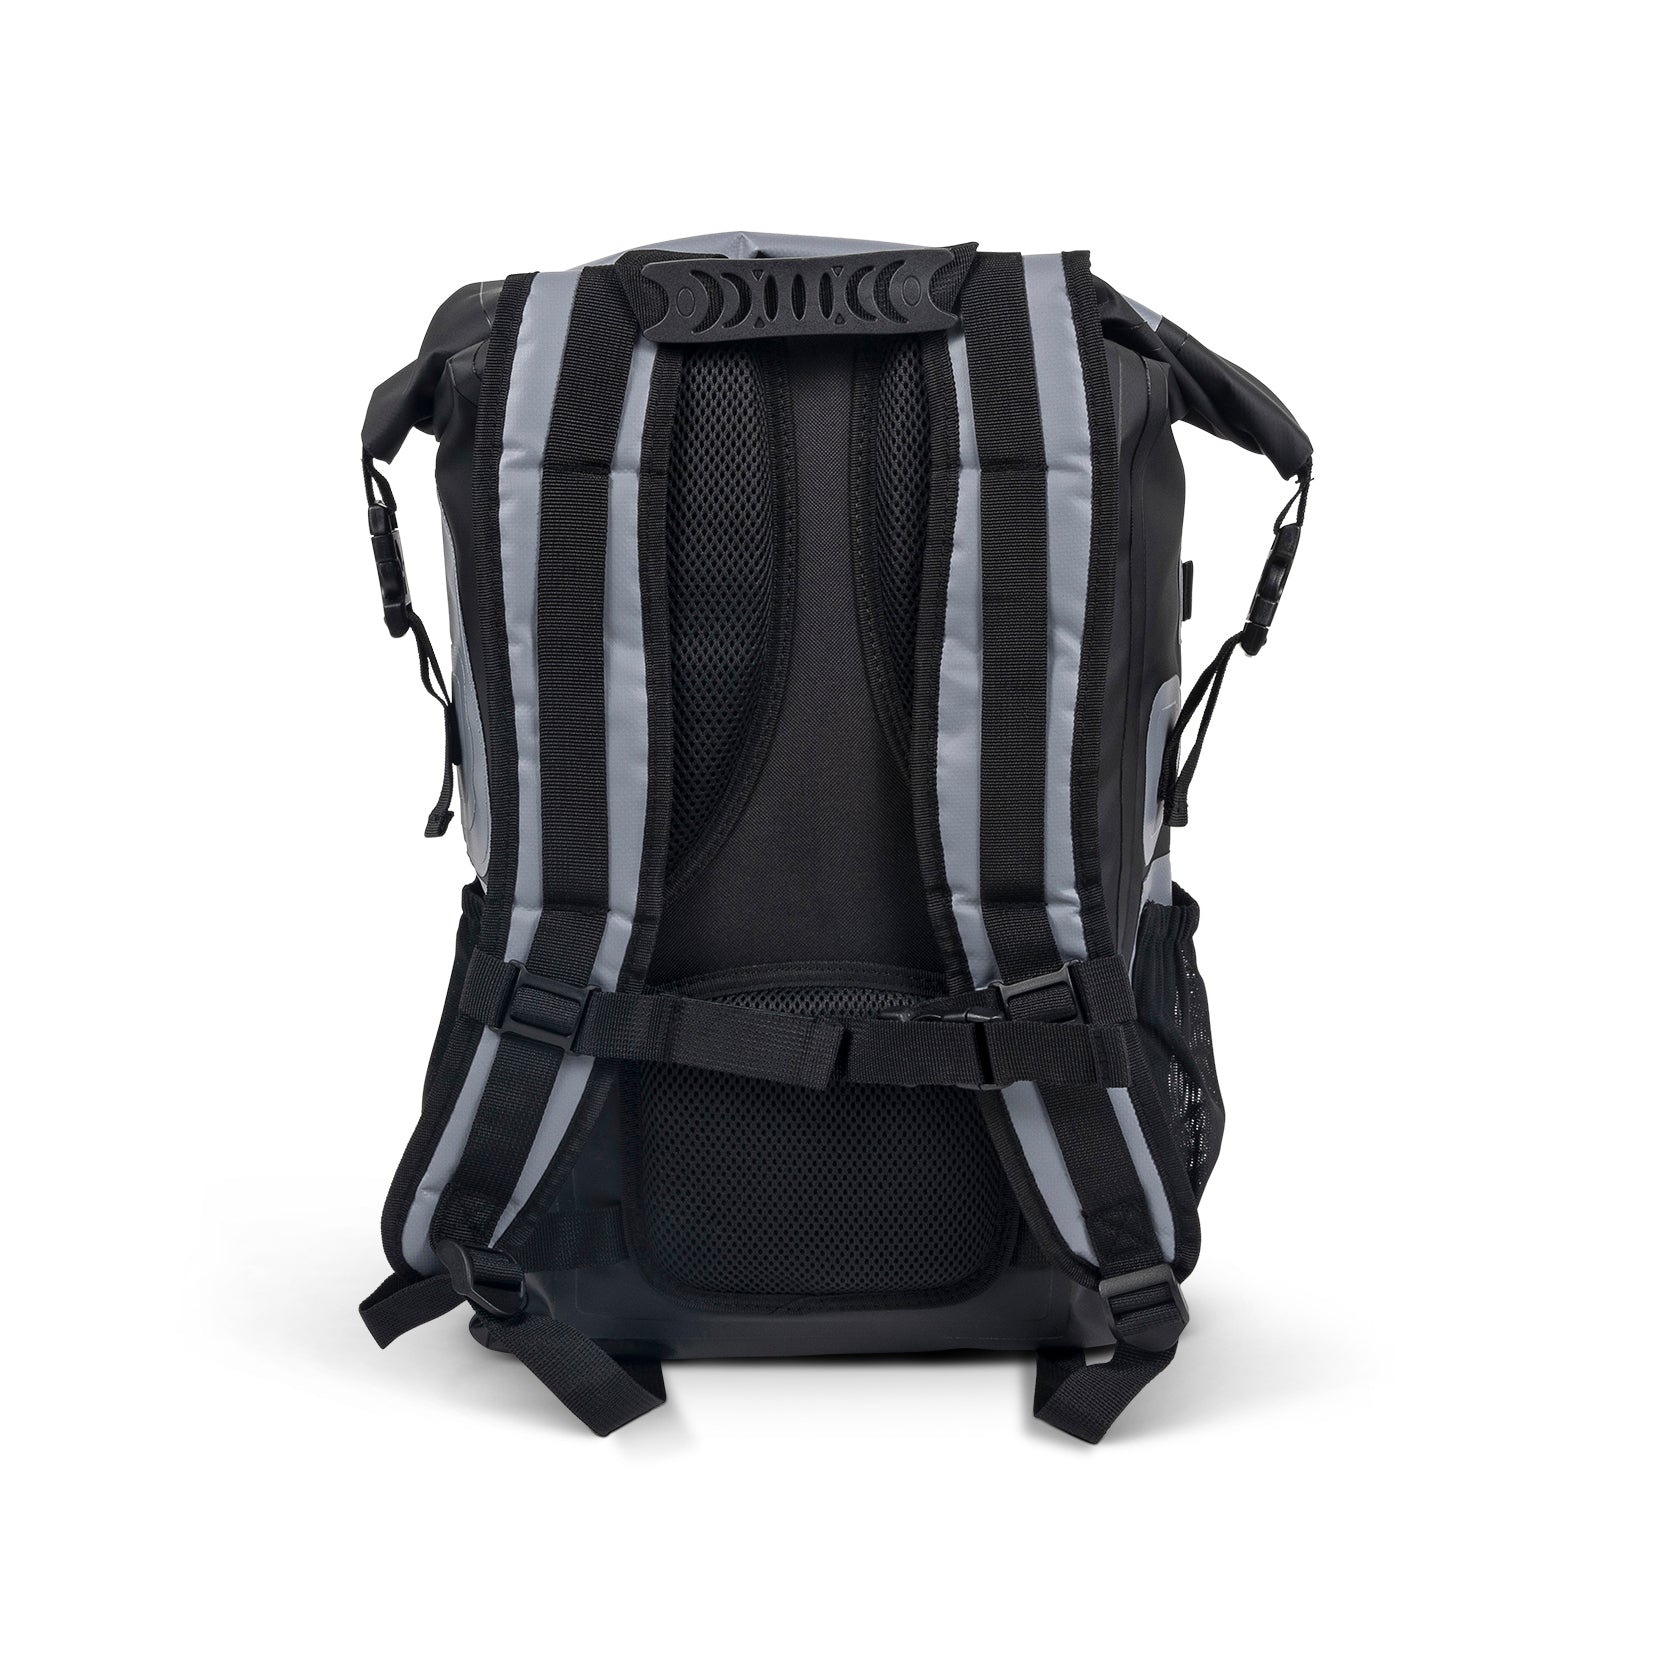 Padded shoulder straps and comfortable back padding reduced fatigue